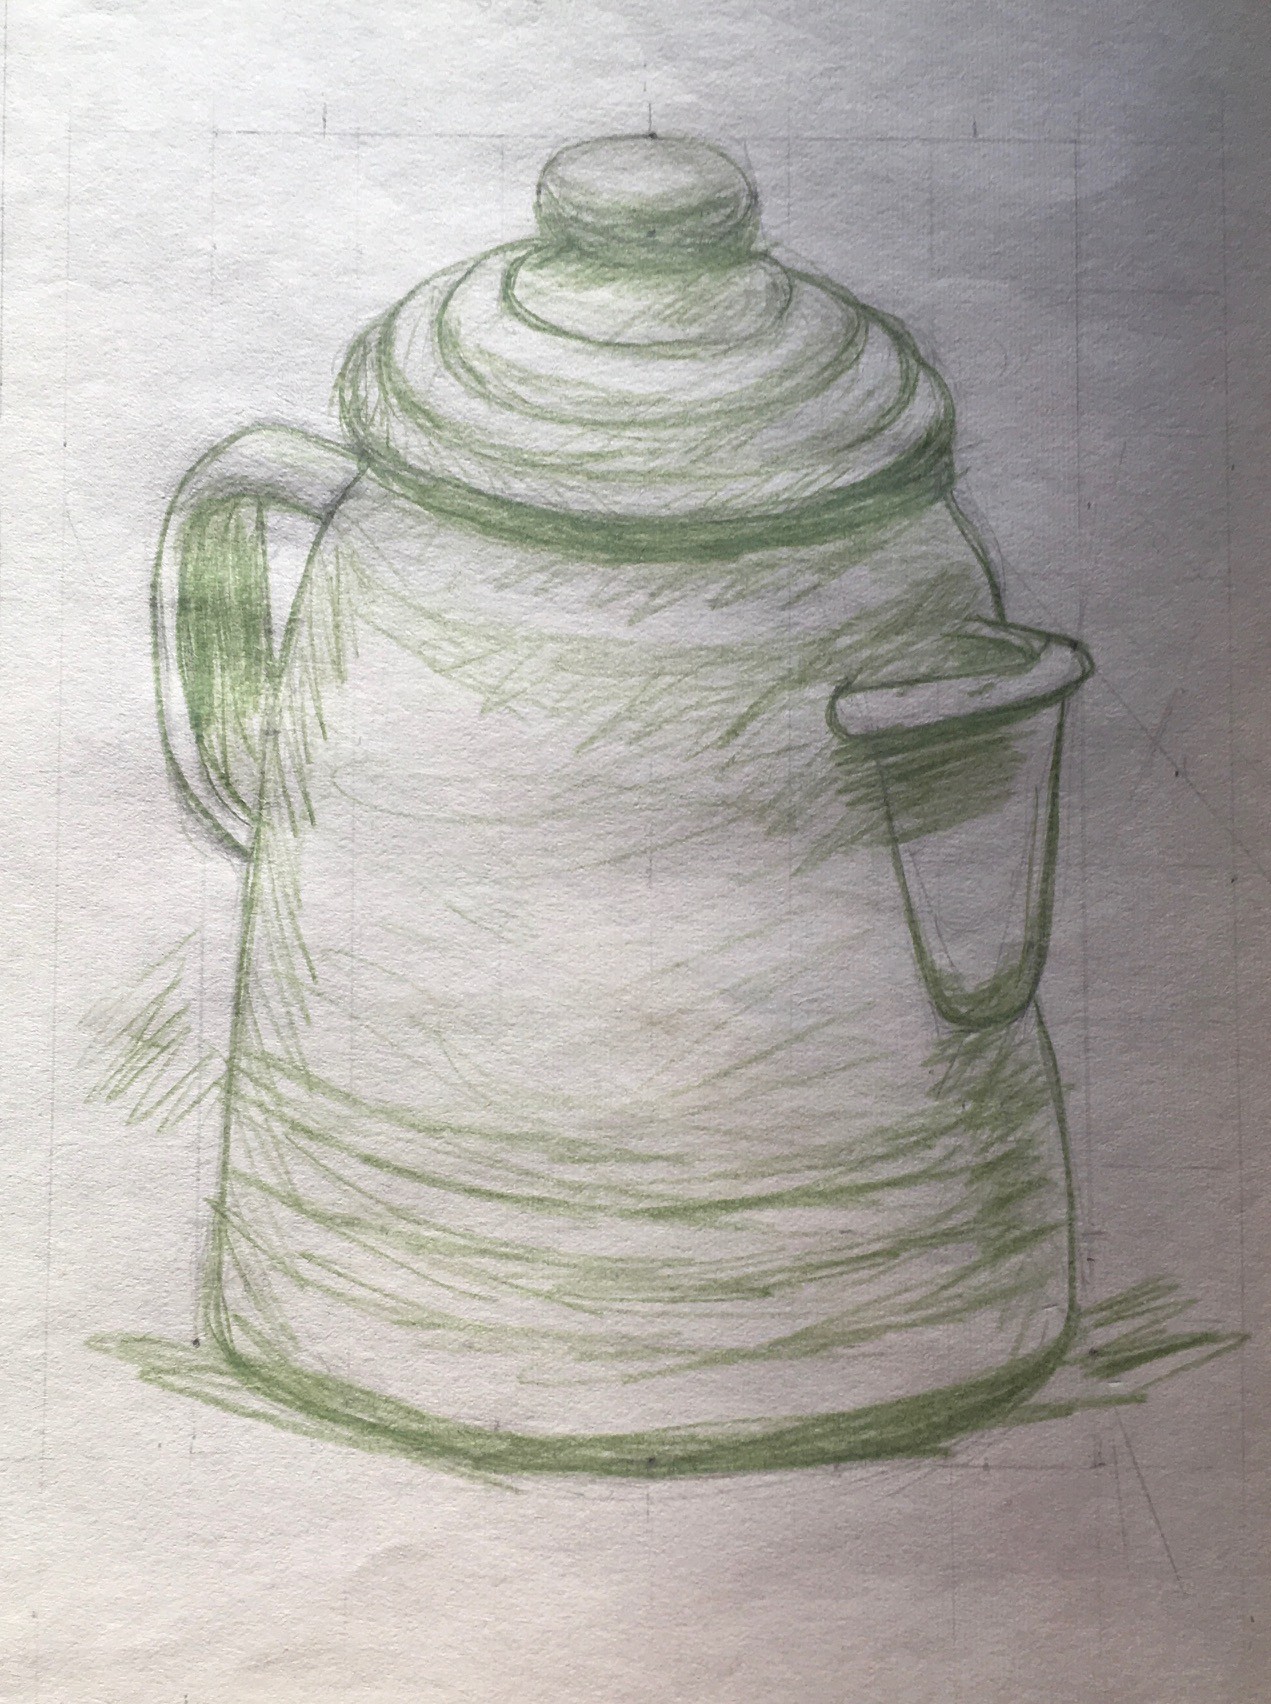 Coffeepot, 2018
Pencil and Colored Pencil on Paper
9"W x 11"H, Walli White, artist